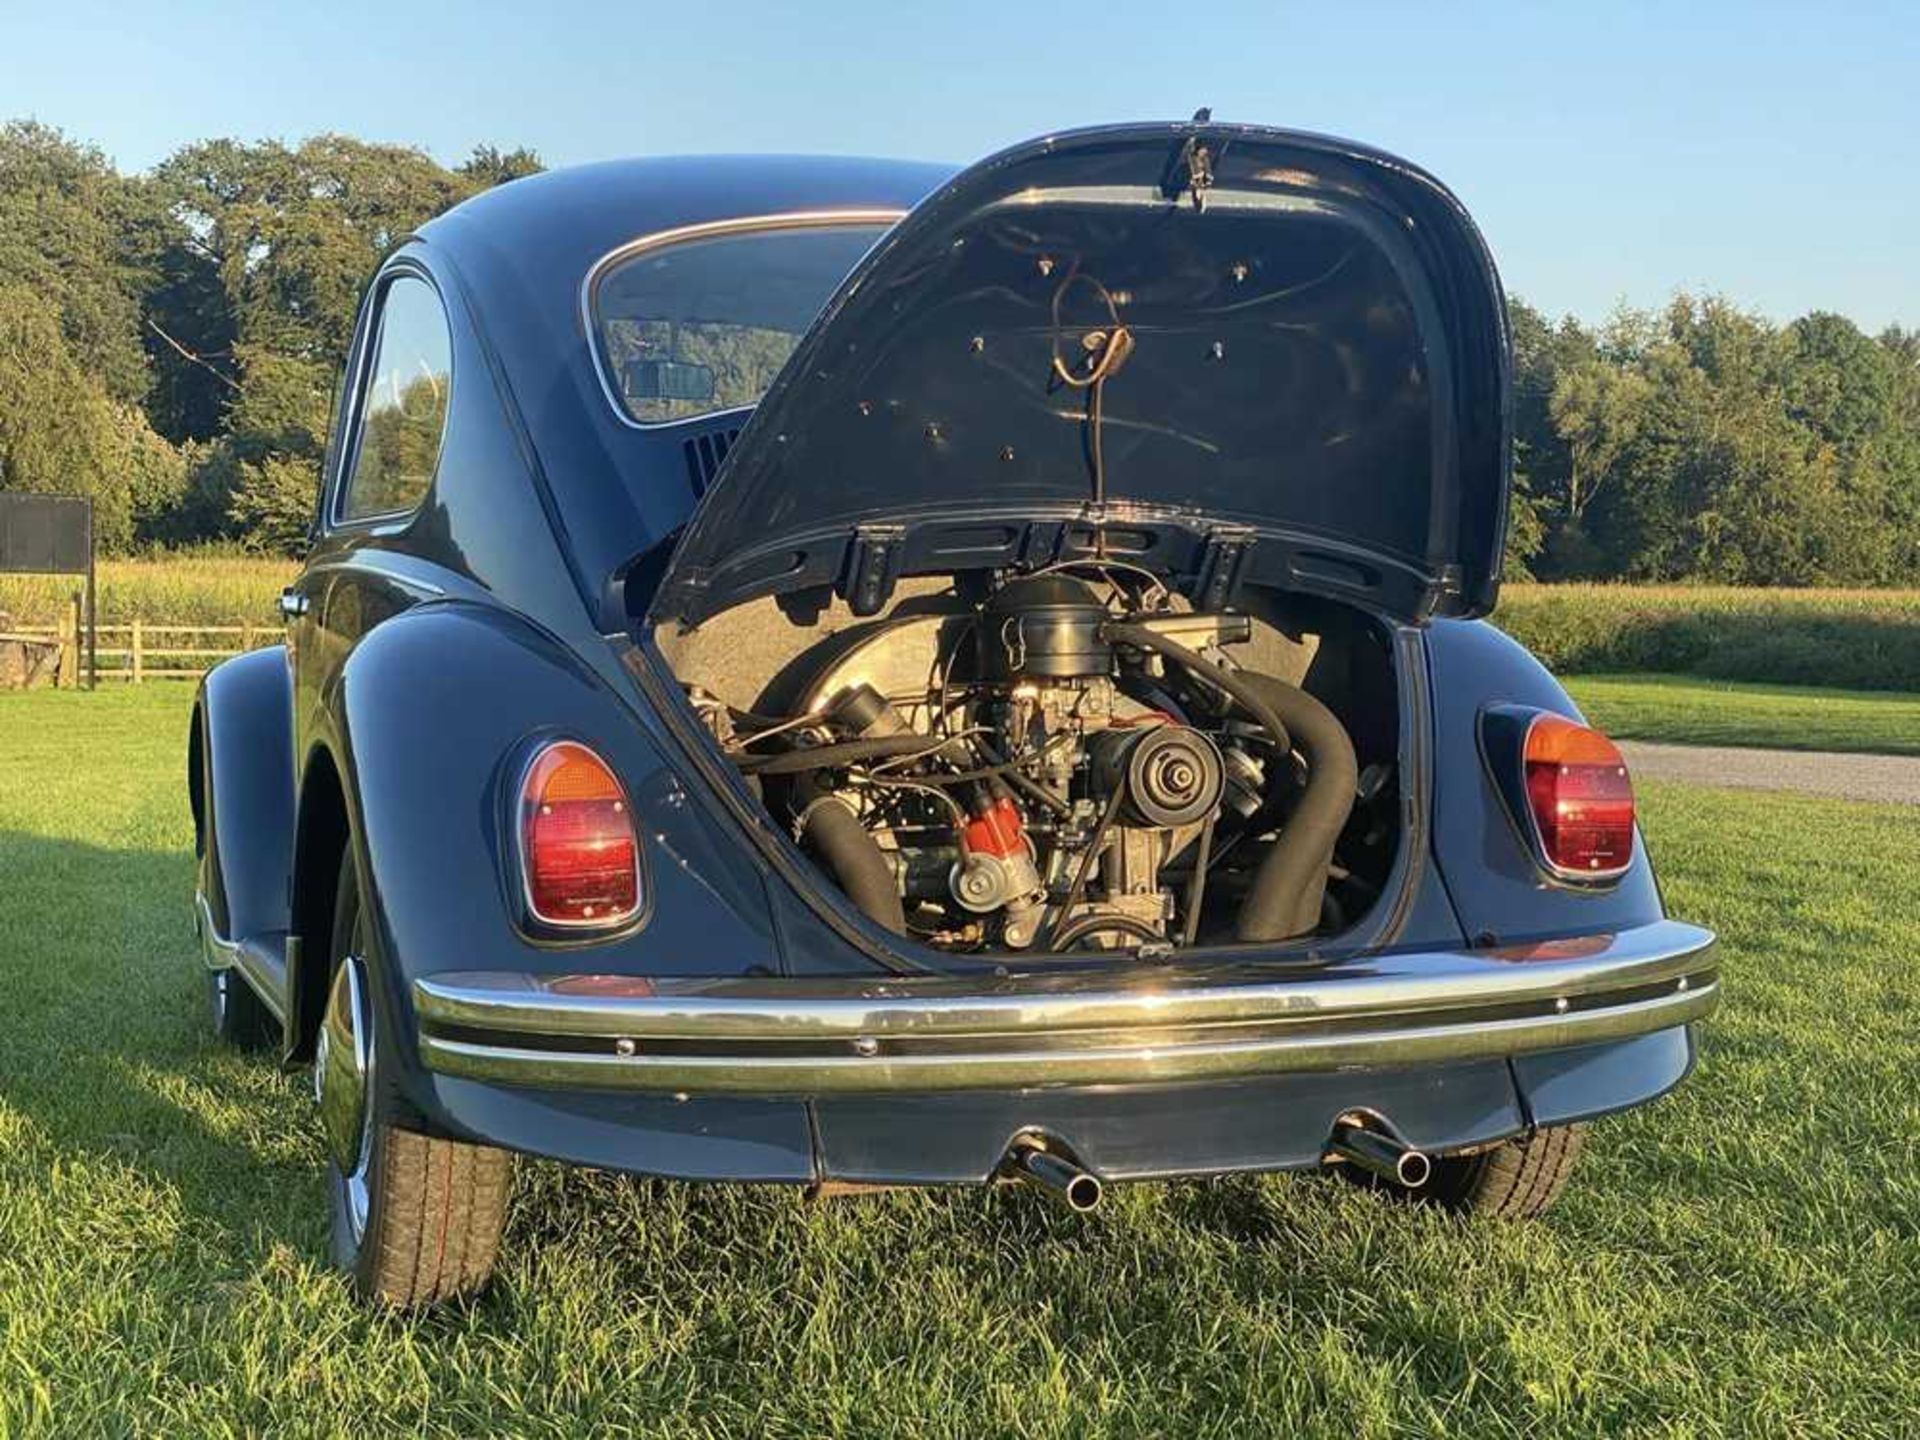 1970 VW Beetle 1300 Semi-Auto A very original example, suitable for a collector - Image 8 of 56